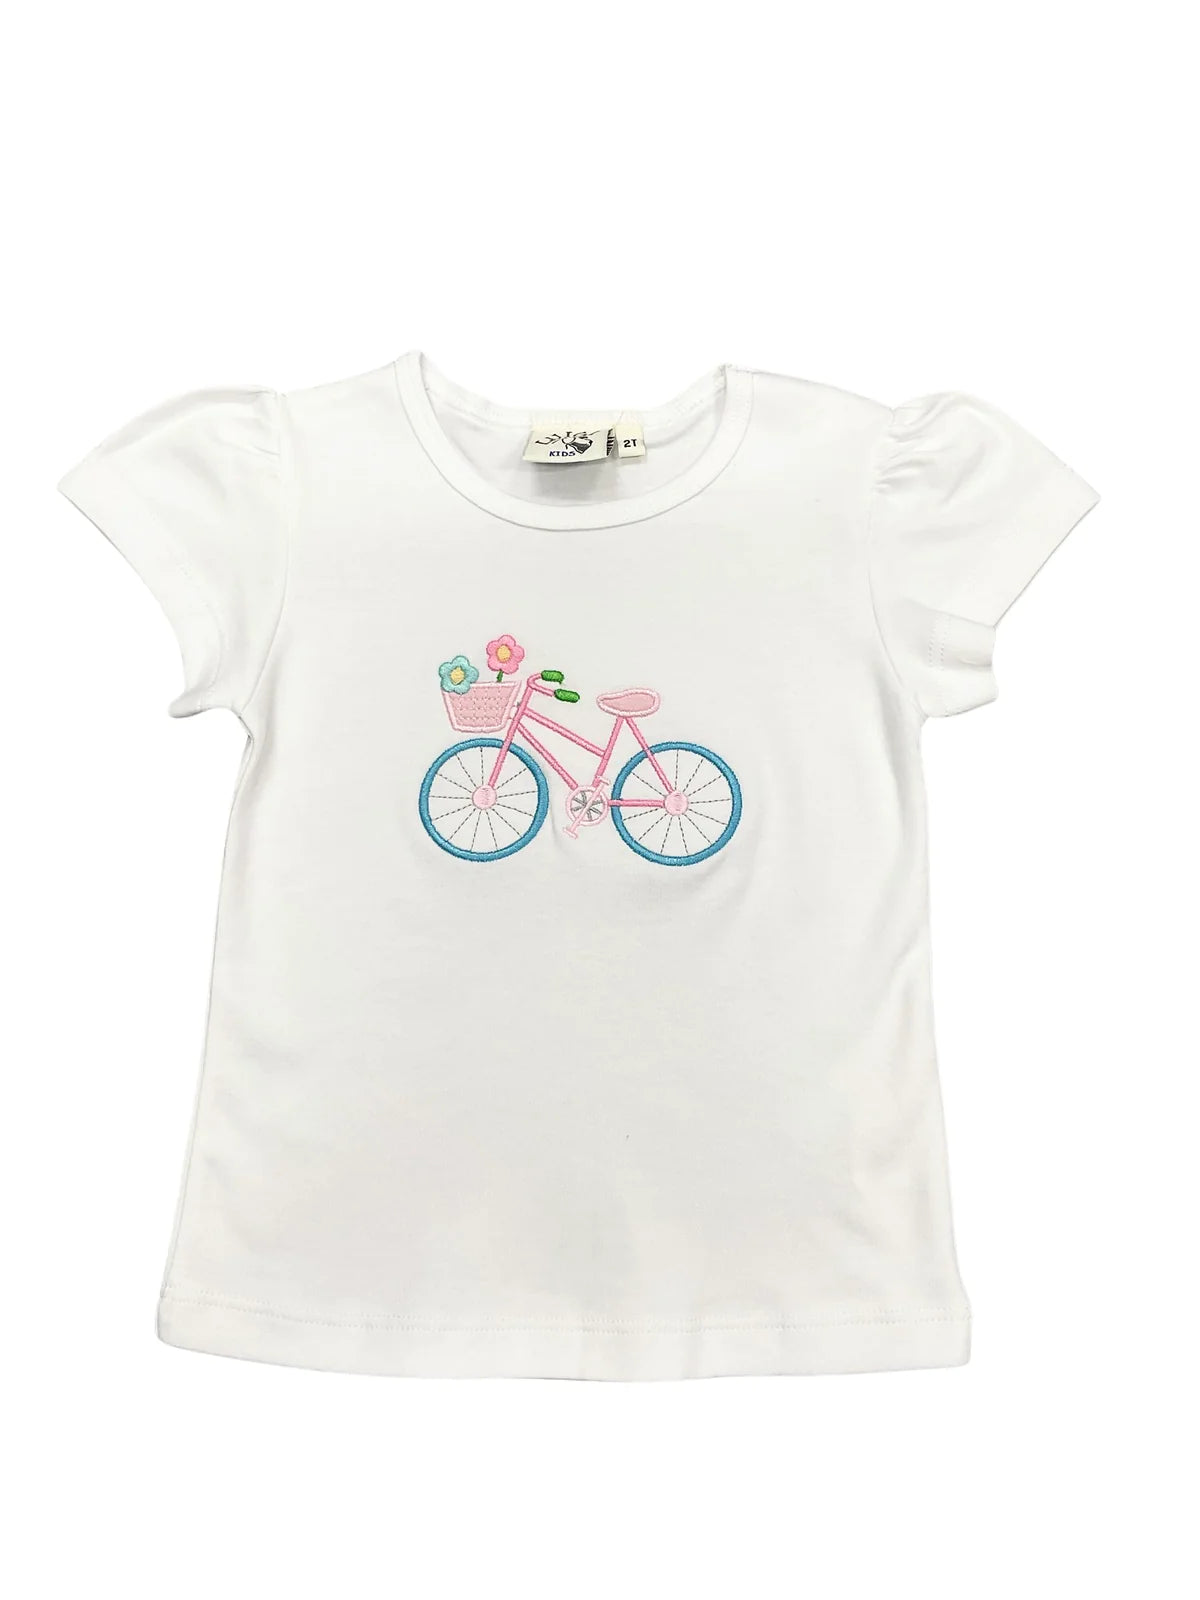 White Capsleeve Tee with Blue & Pink Flower Bike